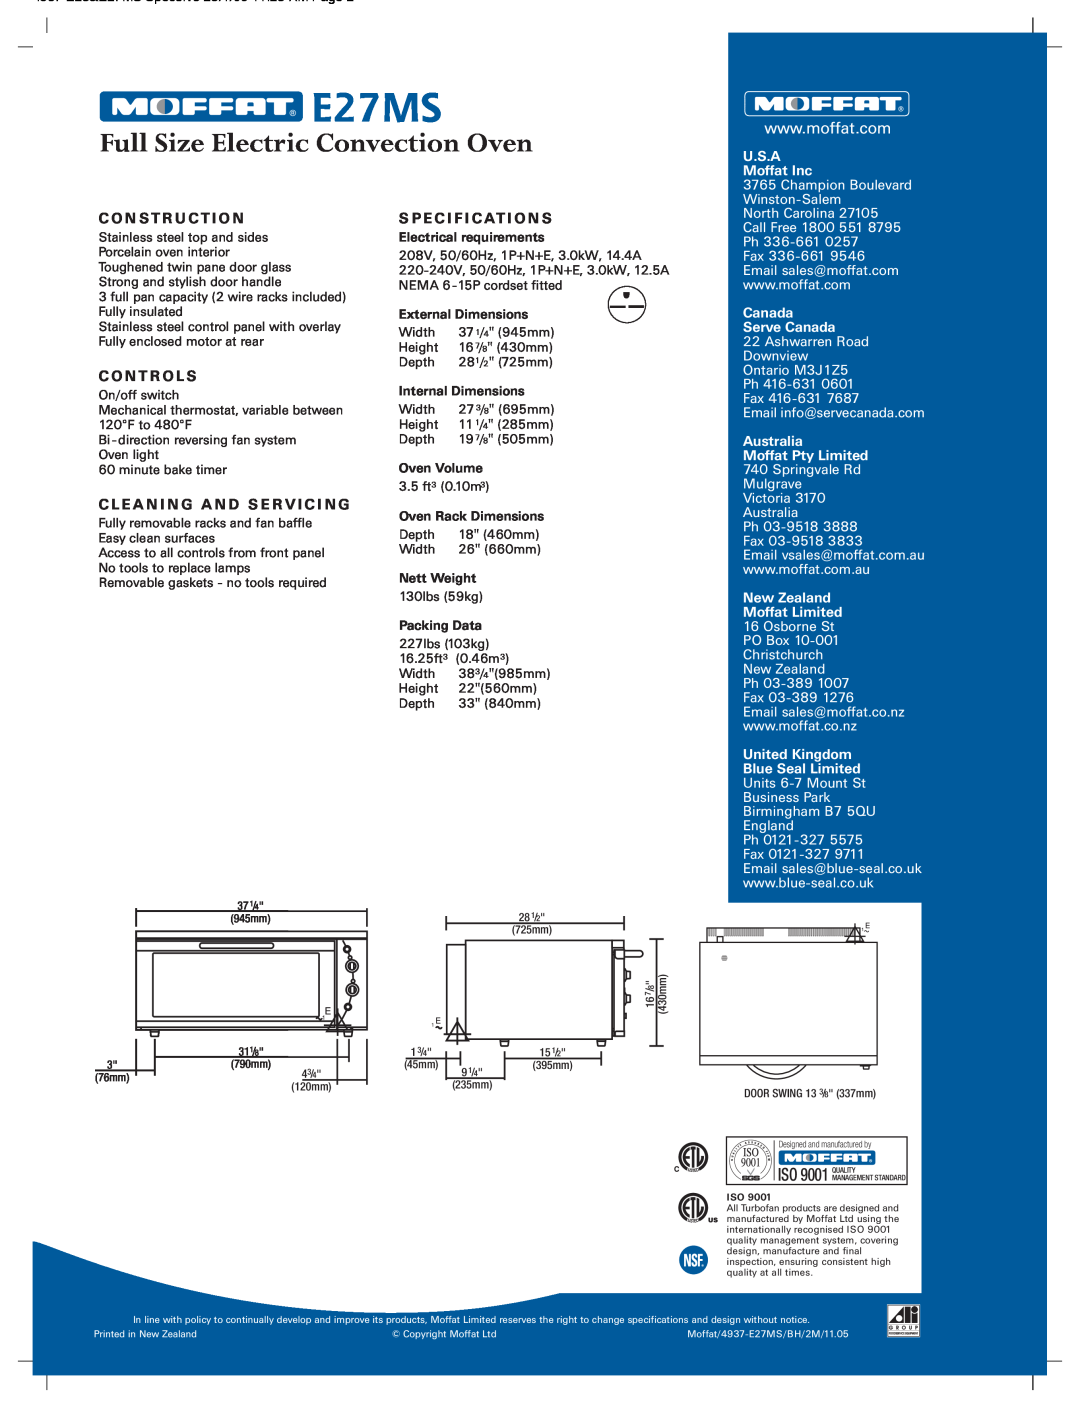 Moffat E27MS manual Electrical requirements, External Dimensions, Internal Dimensions, Oven Volume, Oven Rack Dimensions 